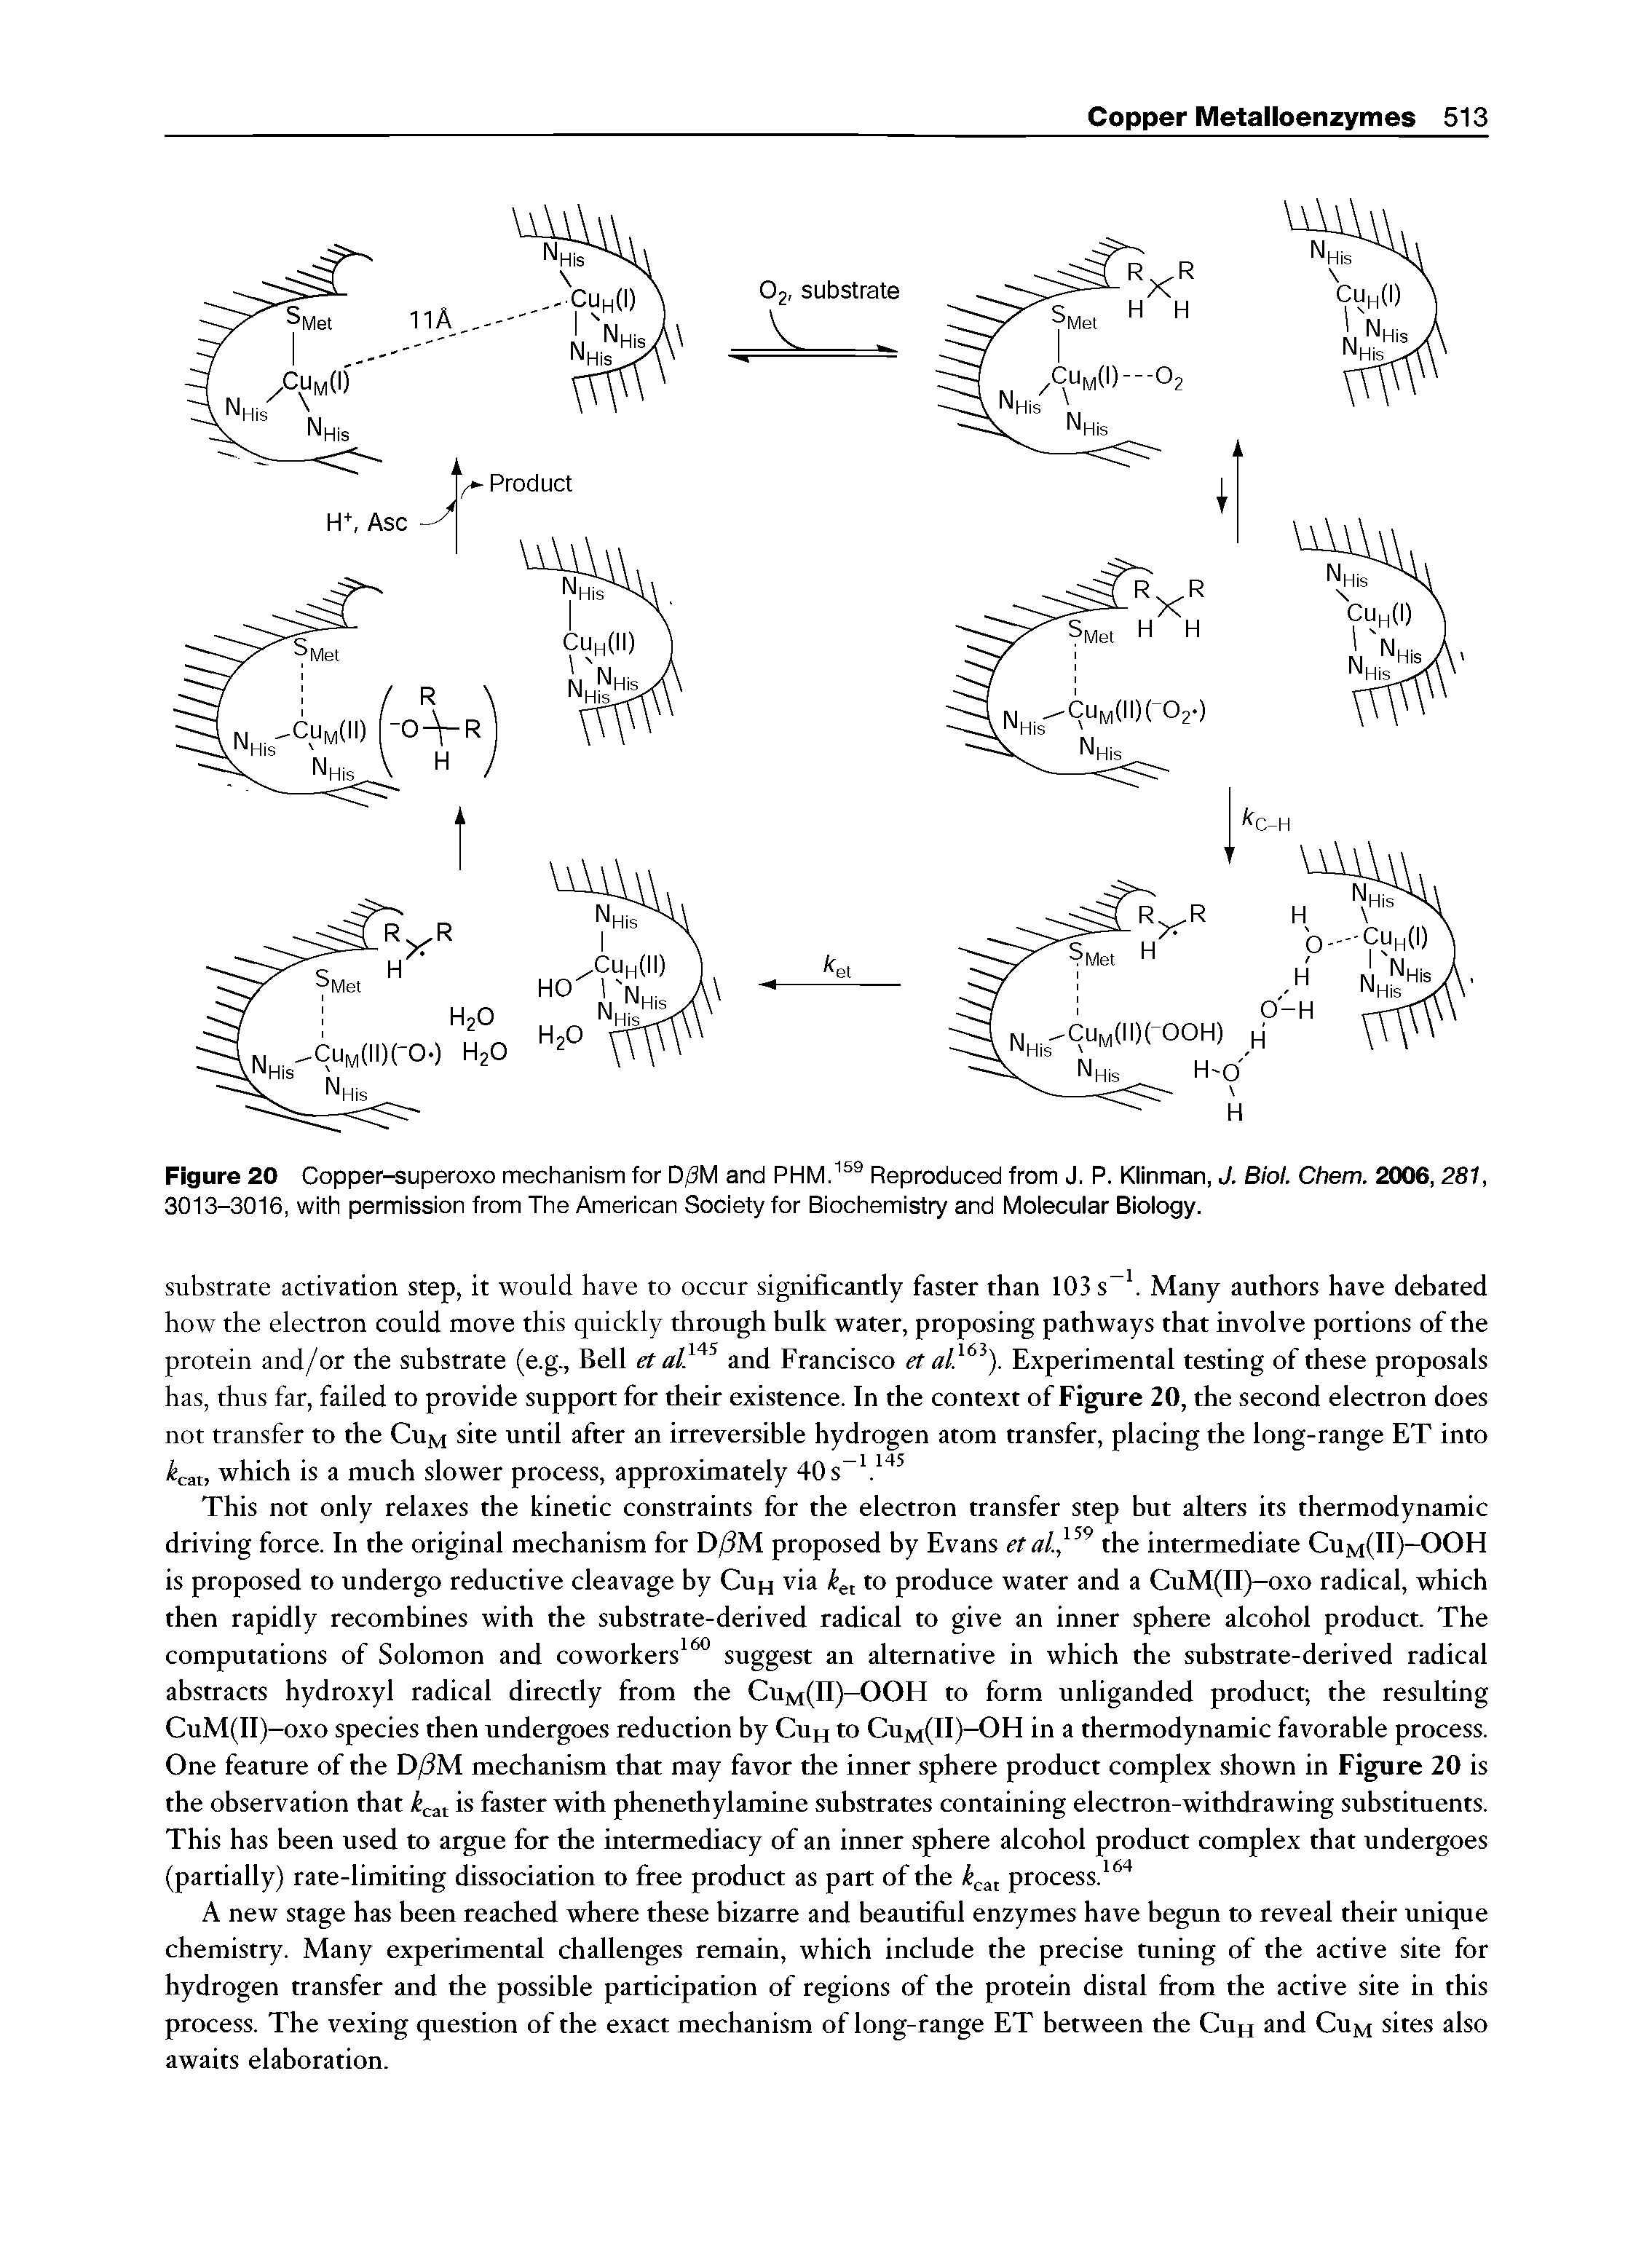 Figure 20 Copper-superoxo mechanism for D/3M and PHM. Reproduced from J. P. Klinman, J. Biol. Chem. 2006, 281, 3013-3016, with permission from The American Society for Biochemistry and Molecular Biology.